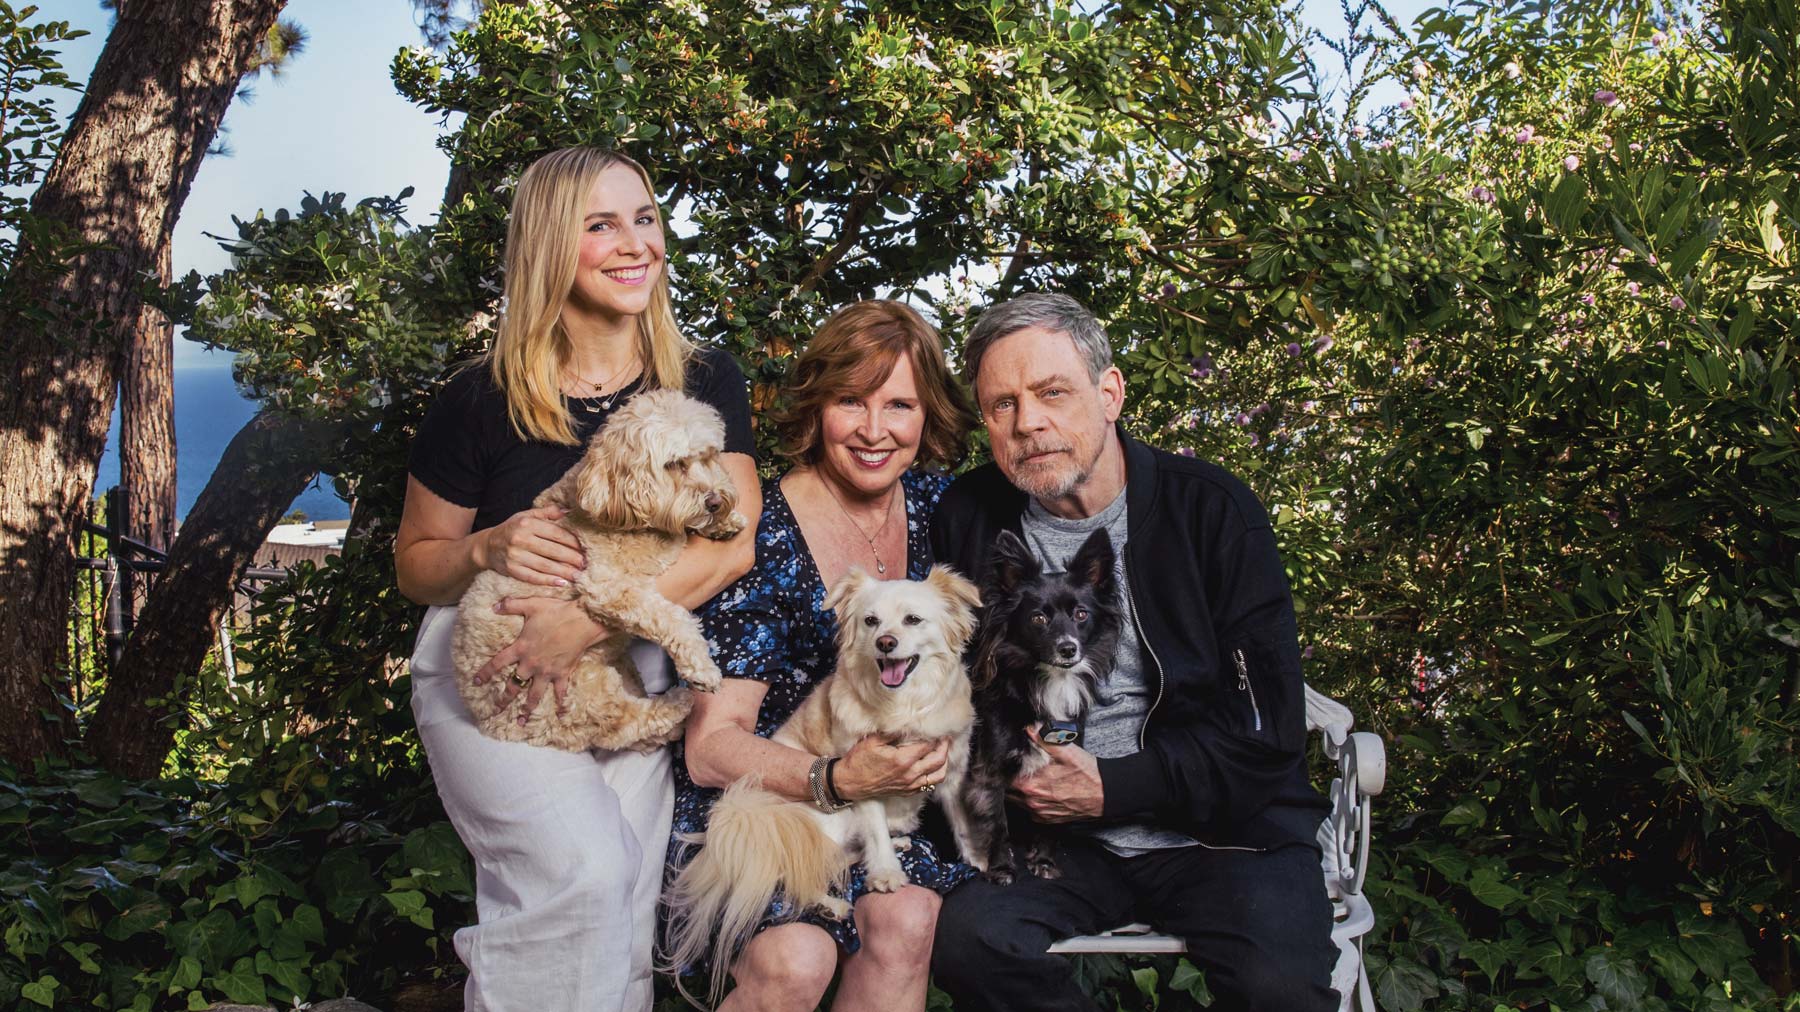 Magazine cover of Vitality with Marilou and Mark Hamill sitting side by side smiling with their daughter and dogs